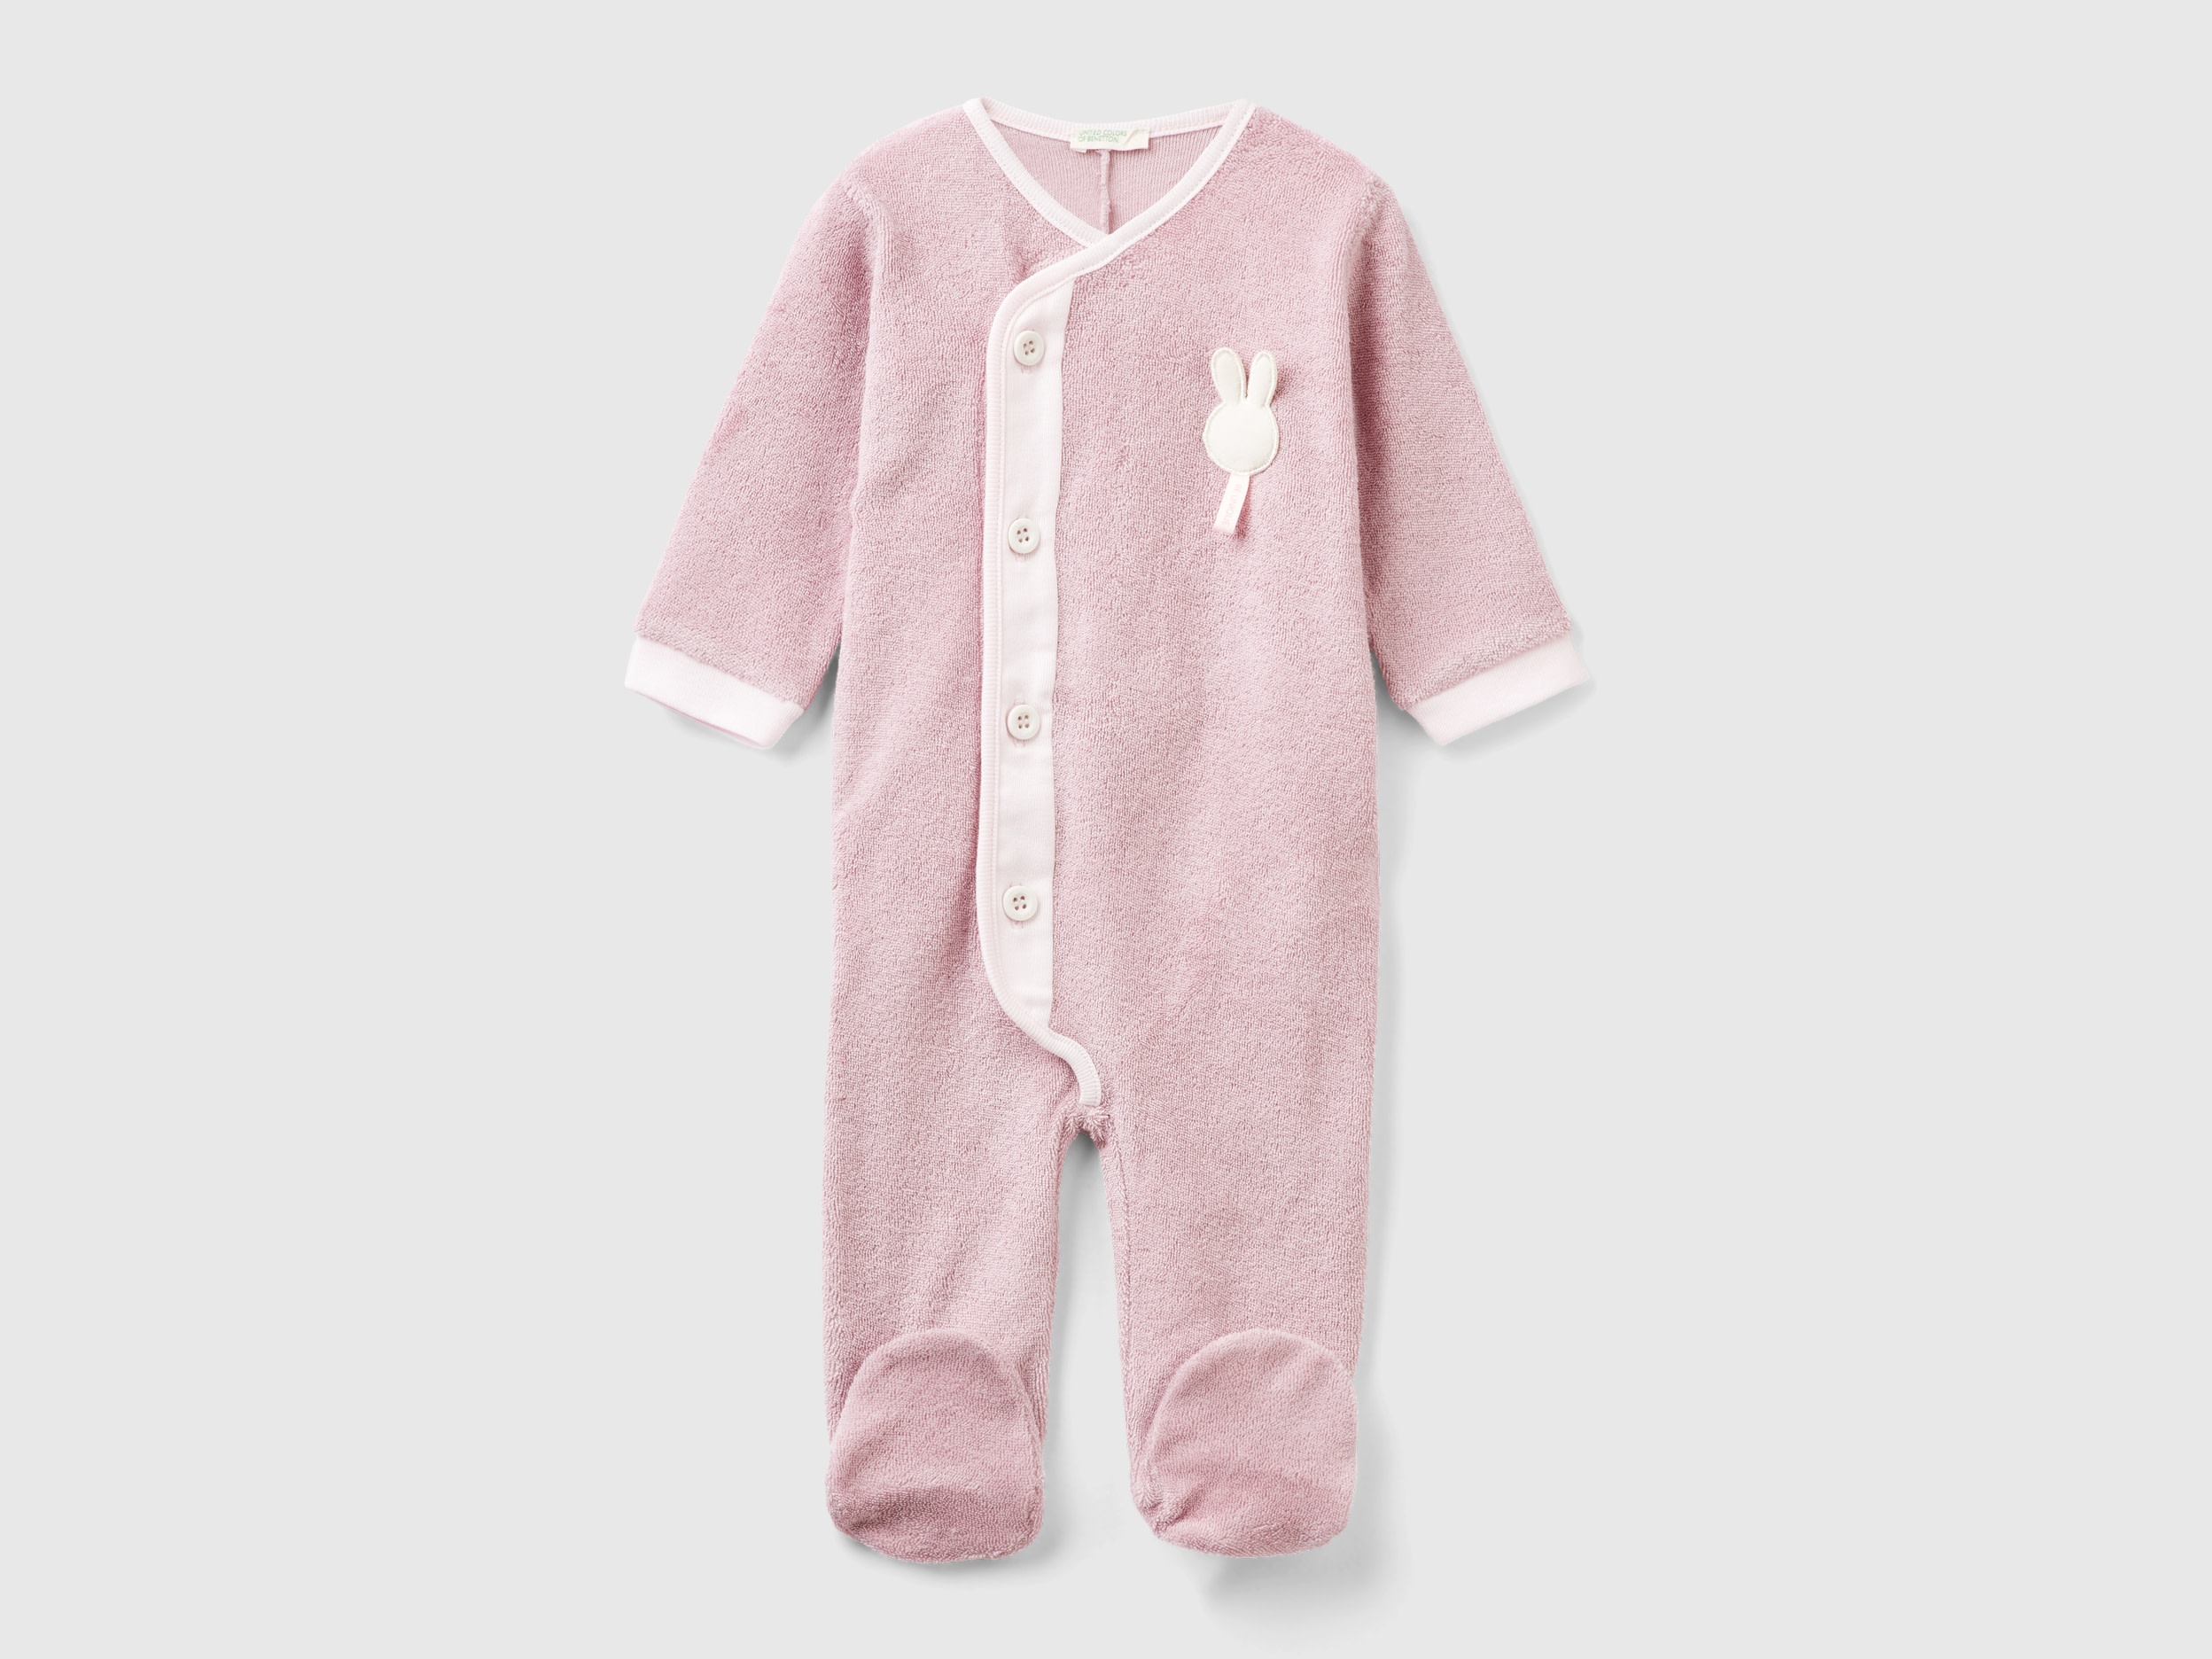 Benetton, Onesie In Terry Cloth With Patch, size 6-9, Pink, Kids